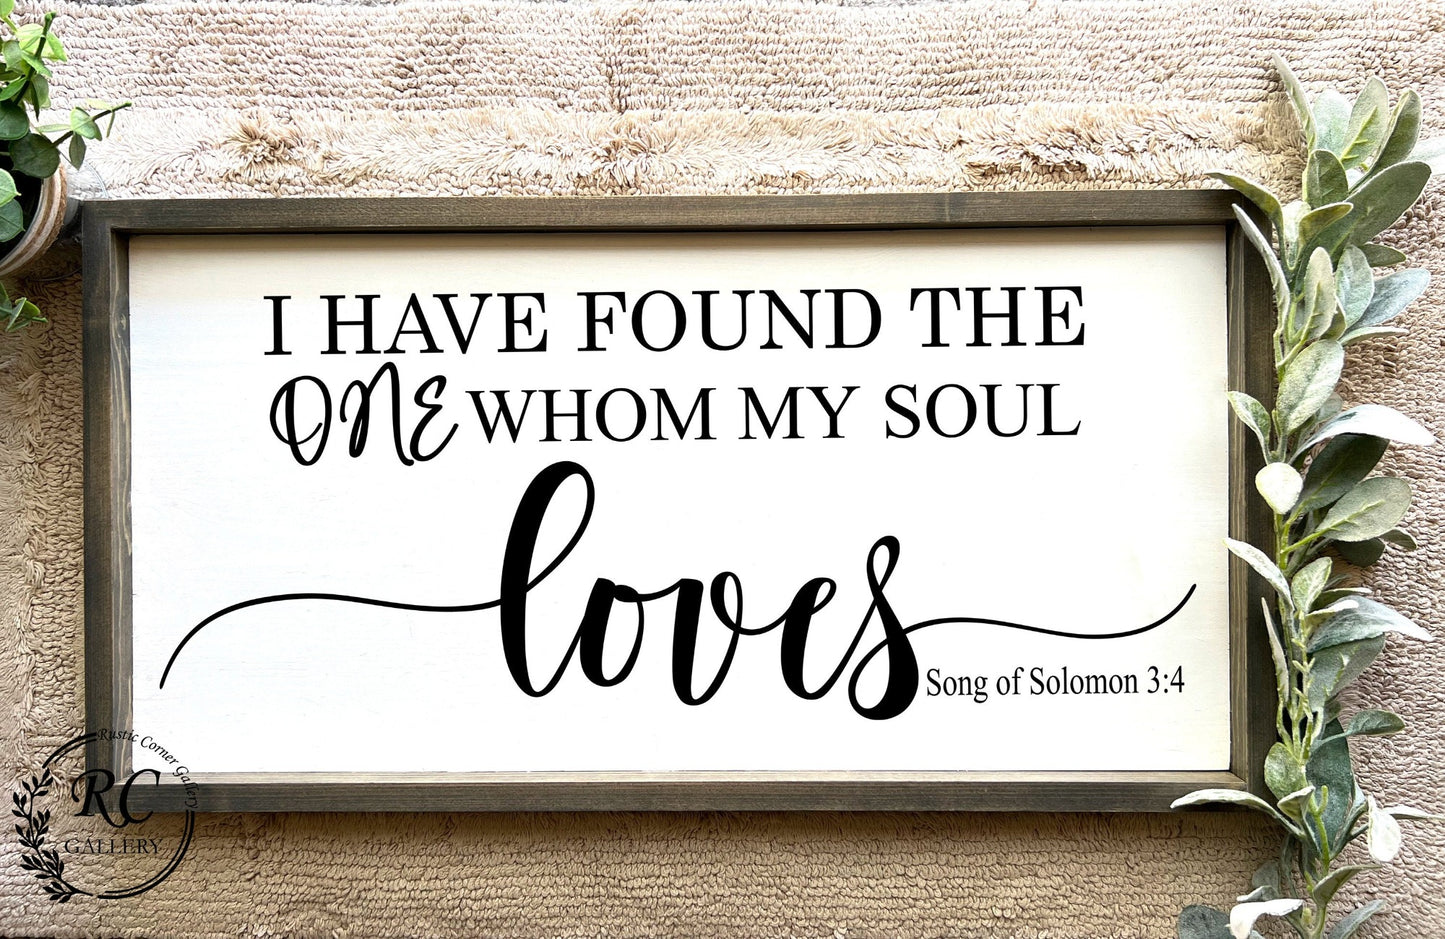 I have found the one whom my soul loves wood sign| Song of Solomon 3:4.